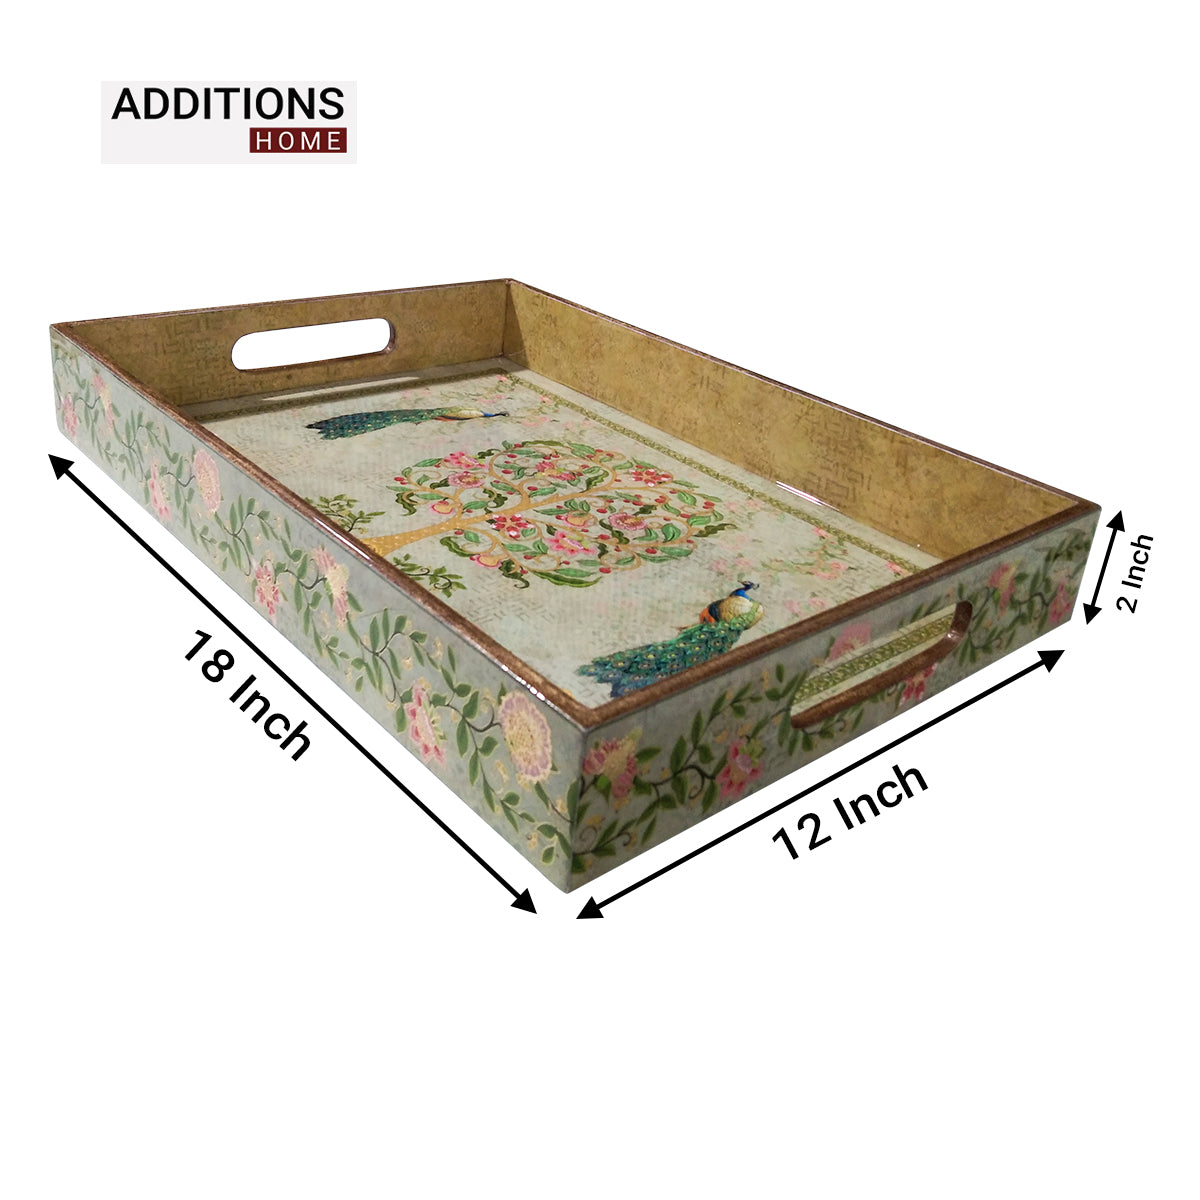 Peacock Printed Wooden Food and Beverages Serving Tray for Home, Office, Kitchen & Dinning  1 pcs